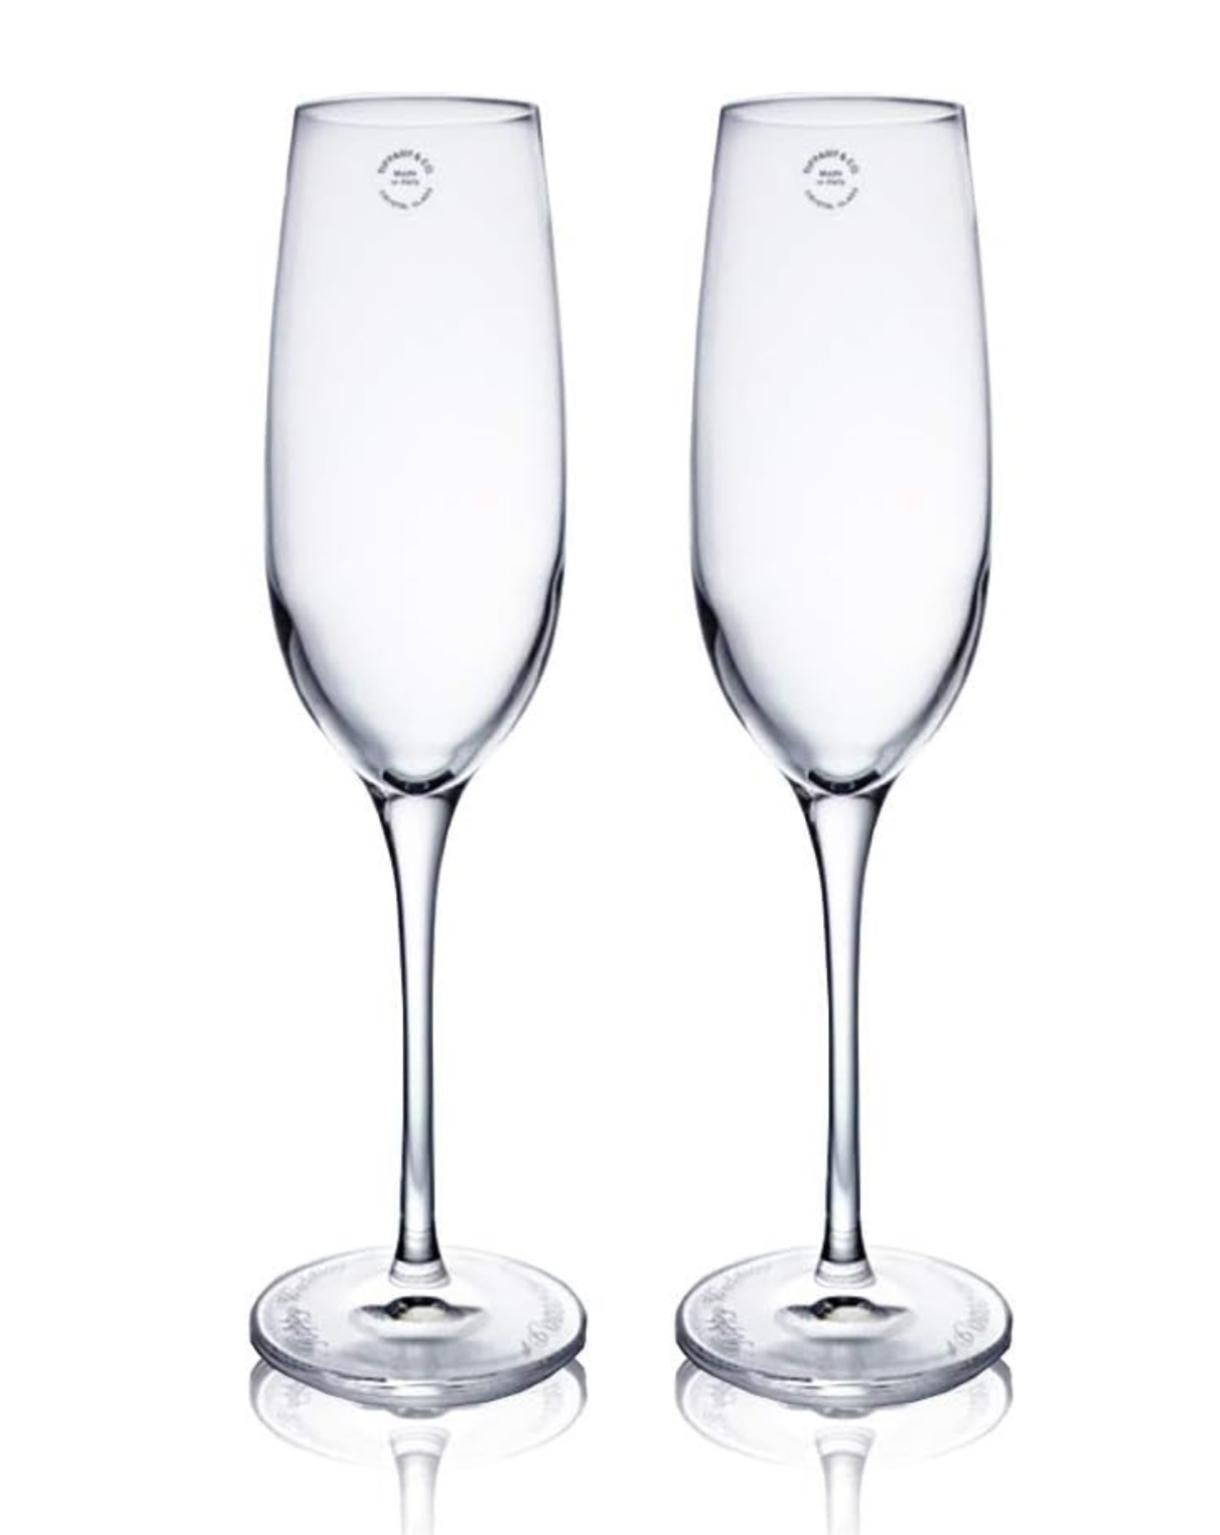 Elevate your next toast with these vintage Tiffany & Co. champagne flutes, made from high-quality crystal.  The clear glass design allows the bubbles to shine through, creating a beautiful visual effect.  They come with an iconic blue Tiffany & Co.